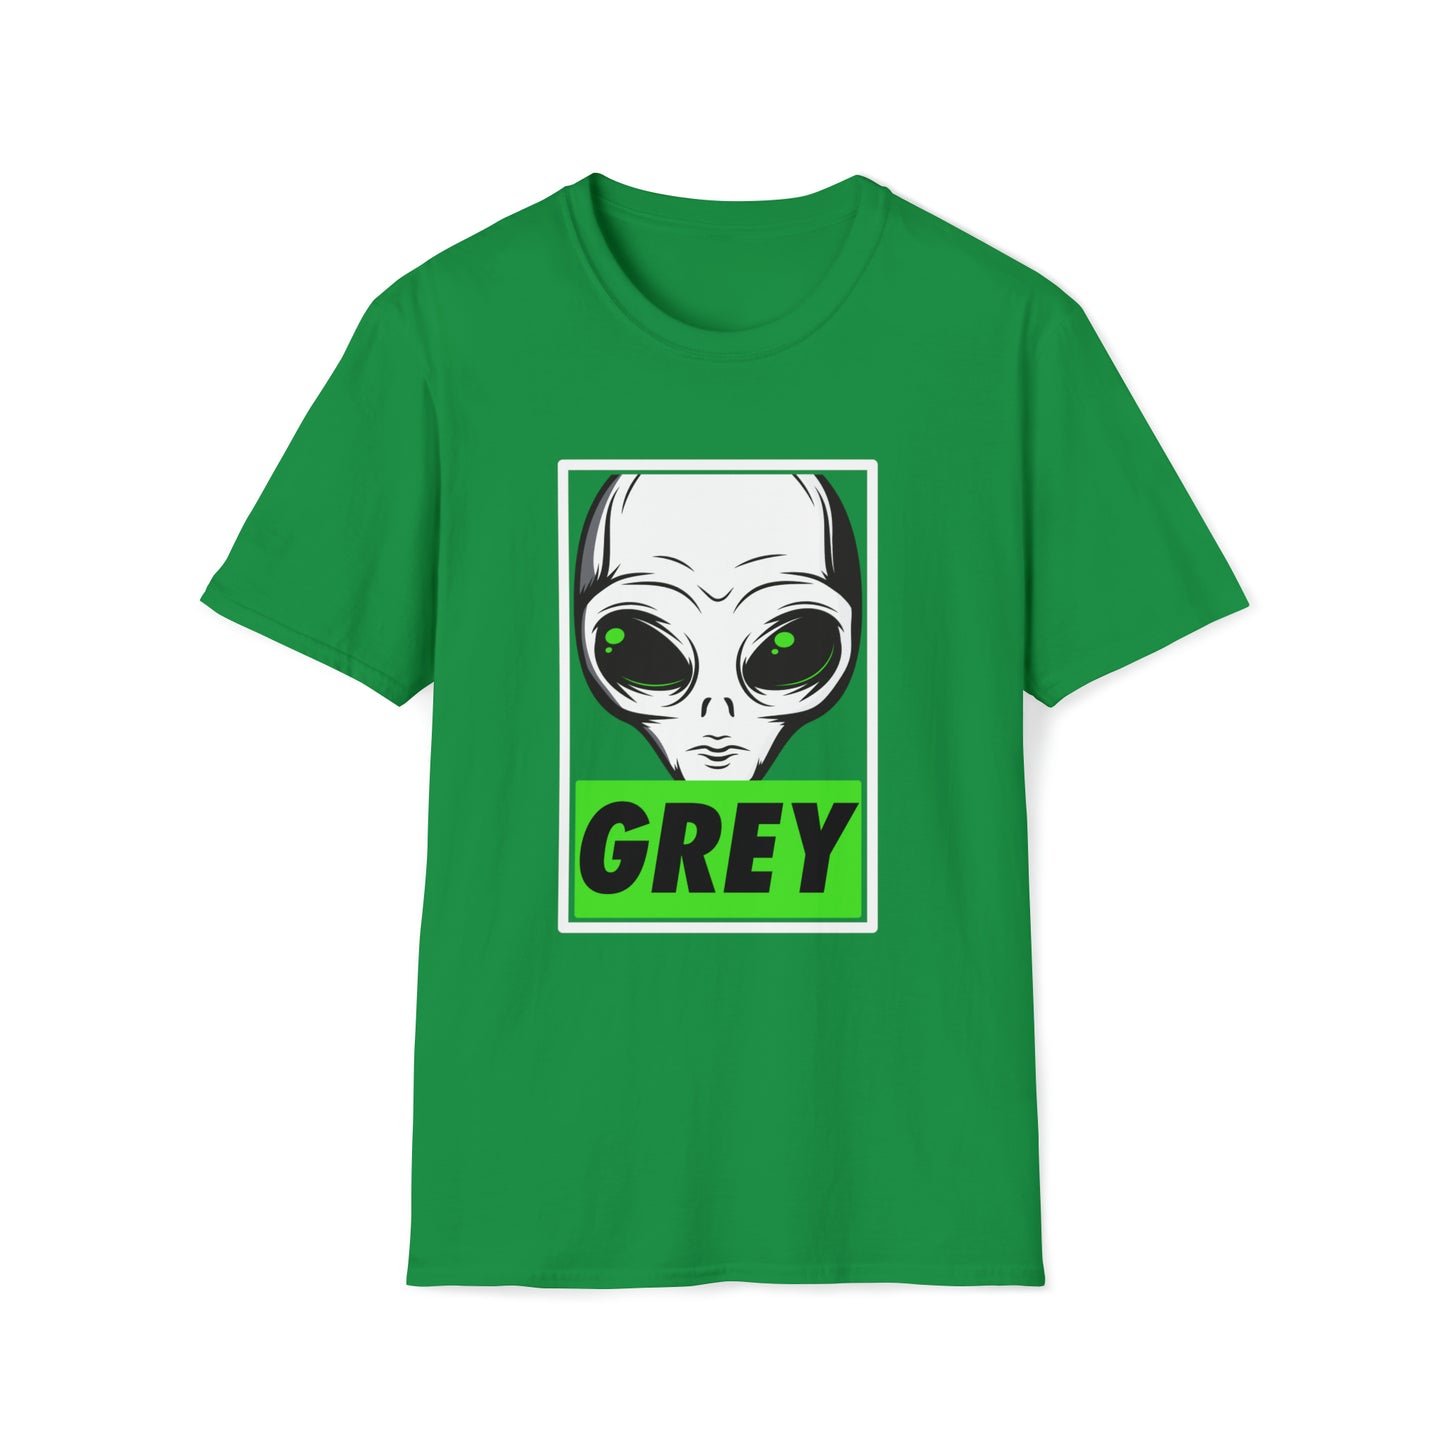 Obey the Greys Tee - Unisex